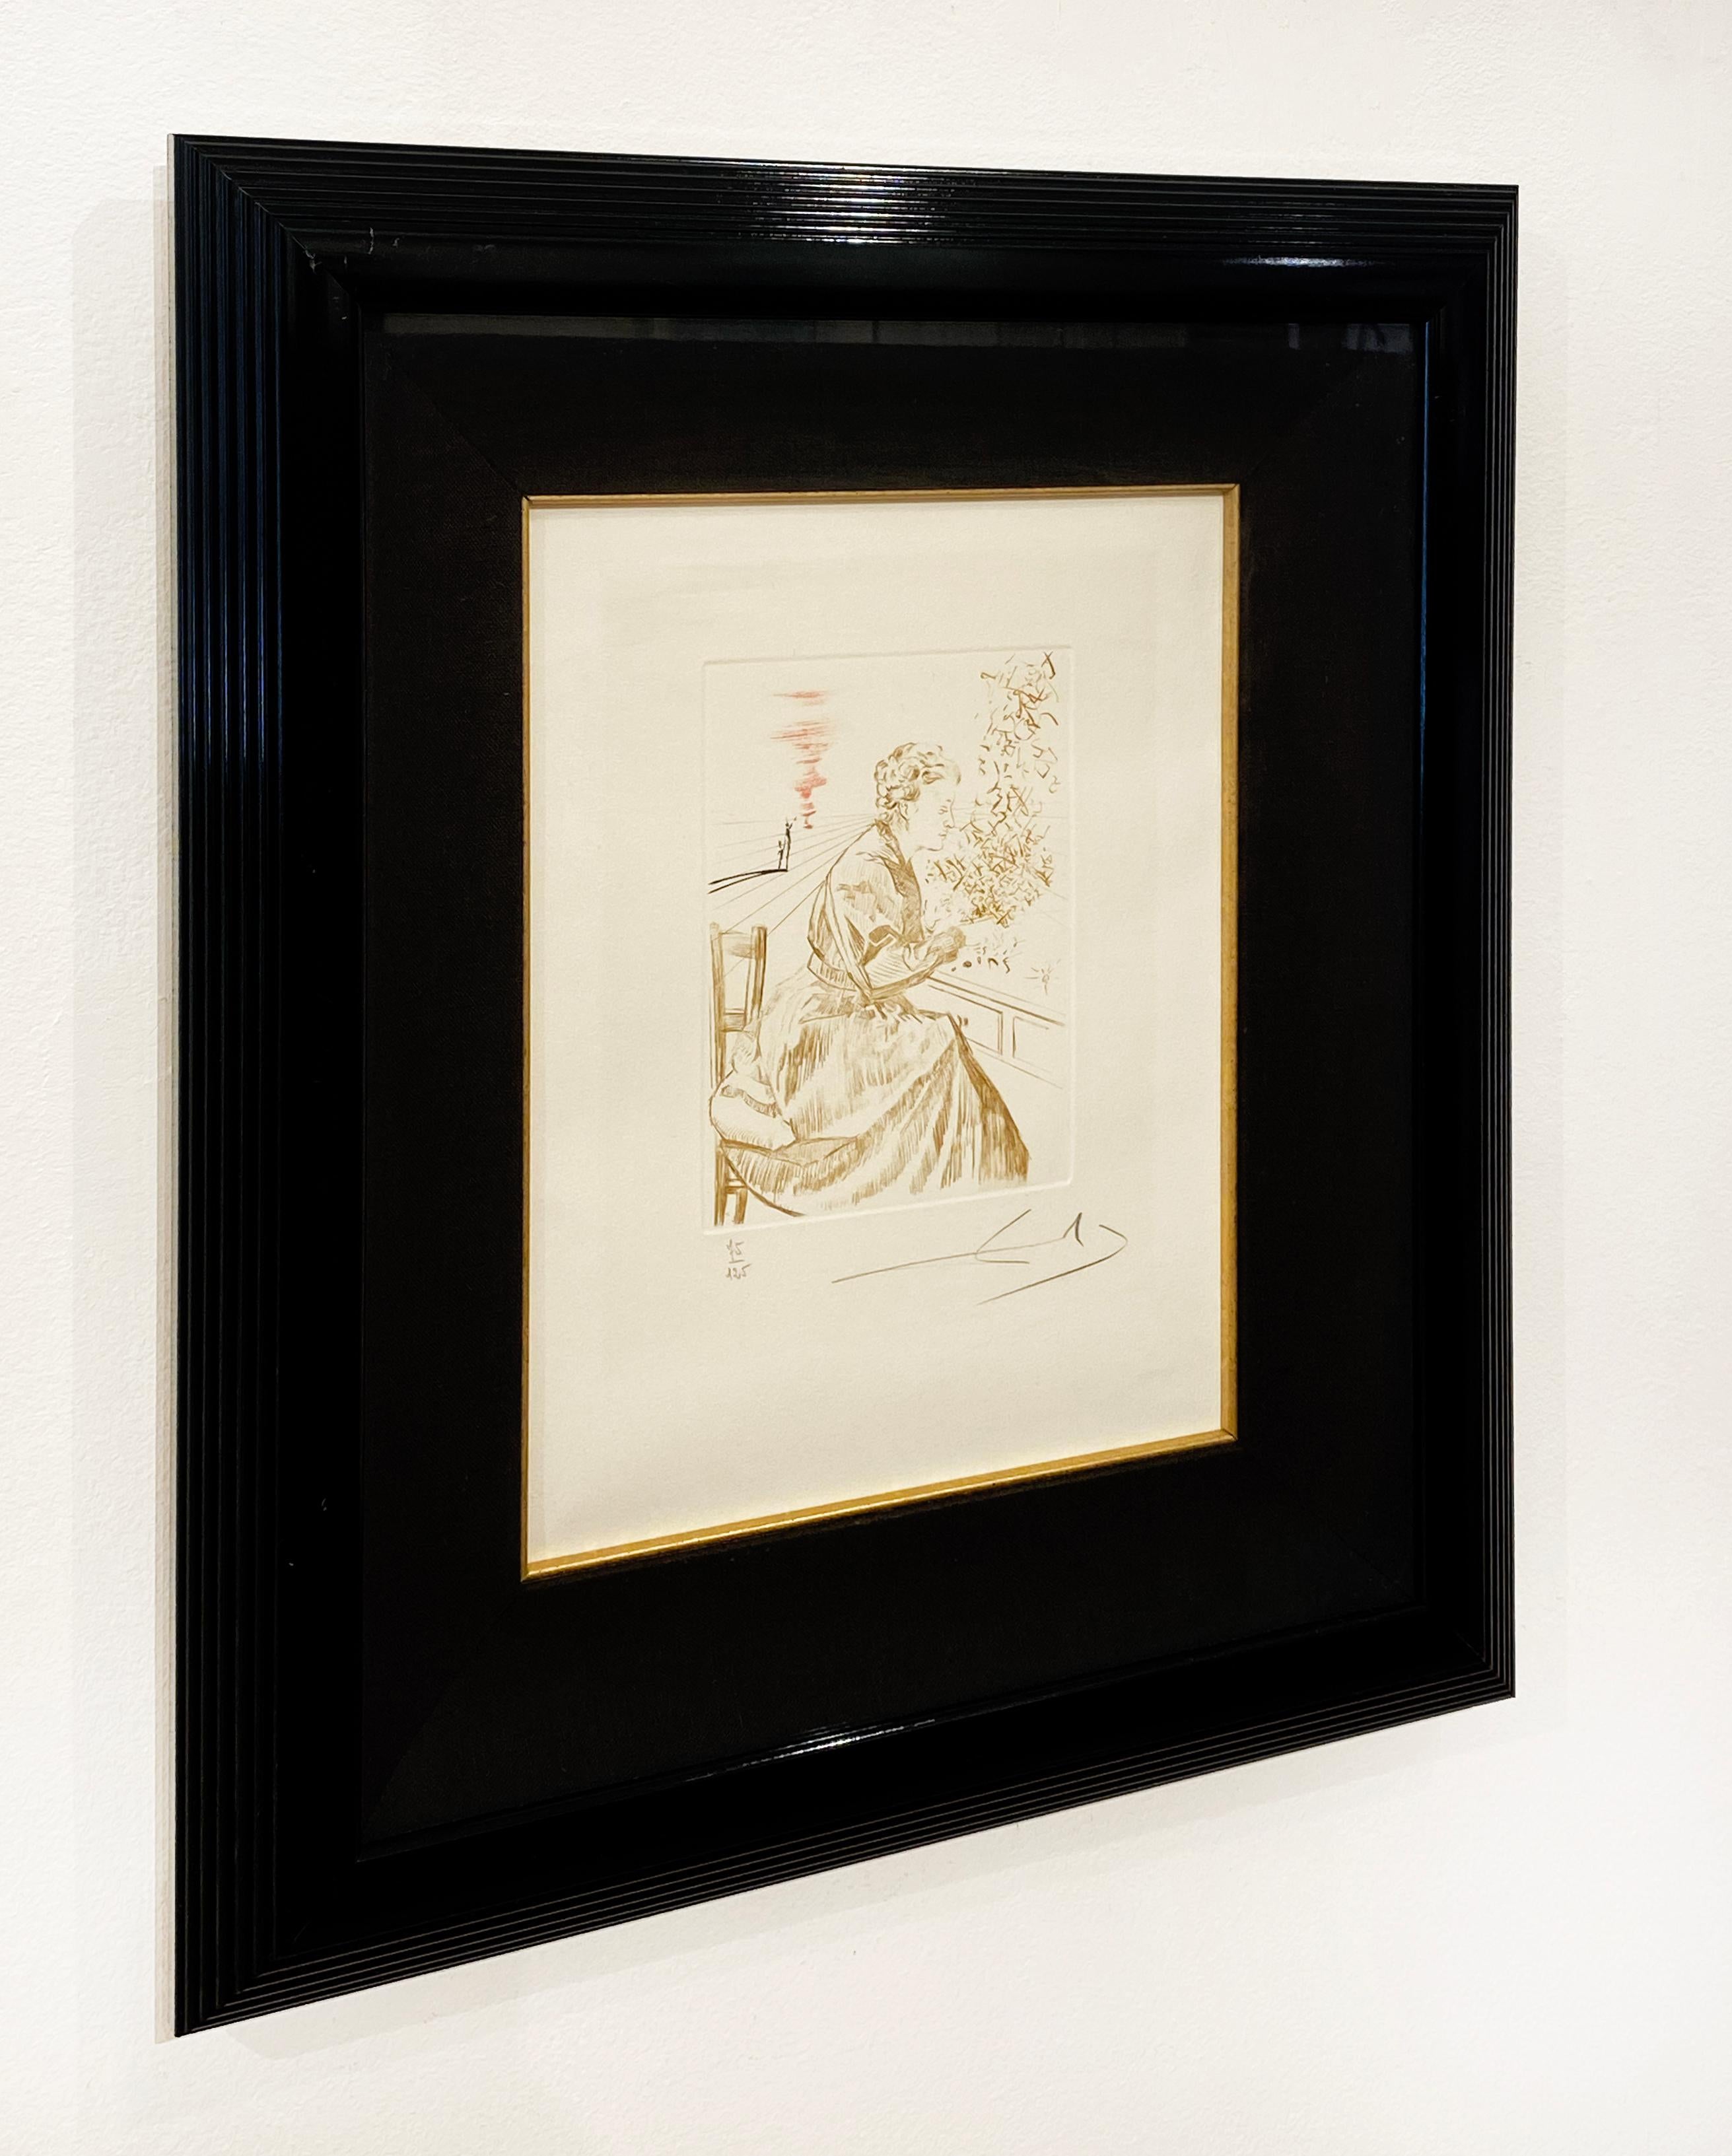 Artist:  Dali, Salvador
Title:  Marie Curie
Series:  Medicine and Science
Date:  1970
Medium:  drypoint
Framed Dimensions:  20.25